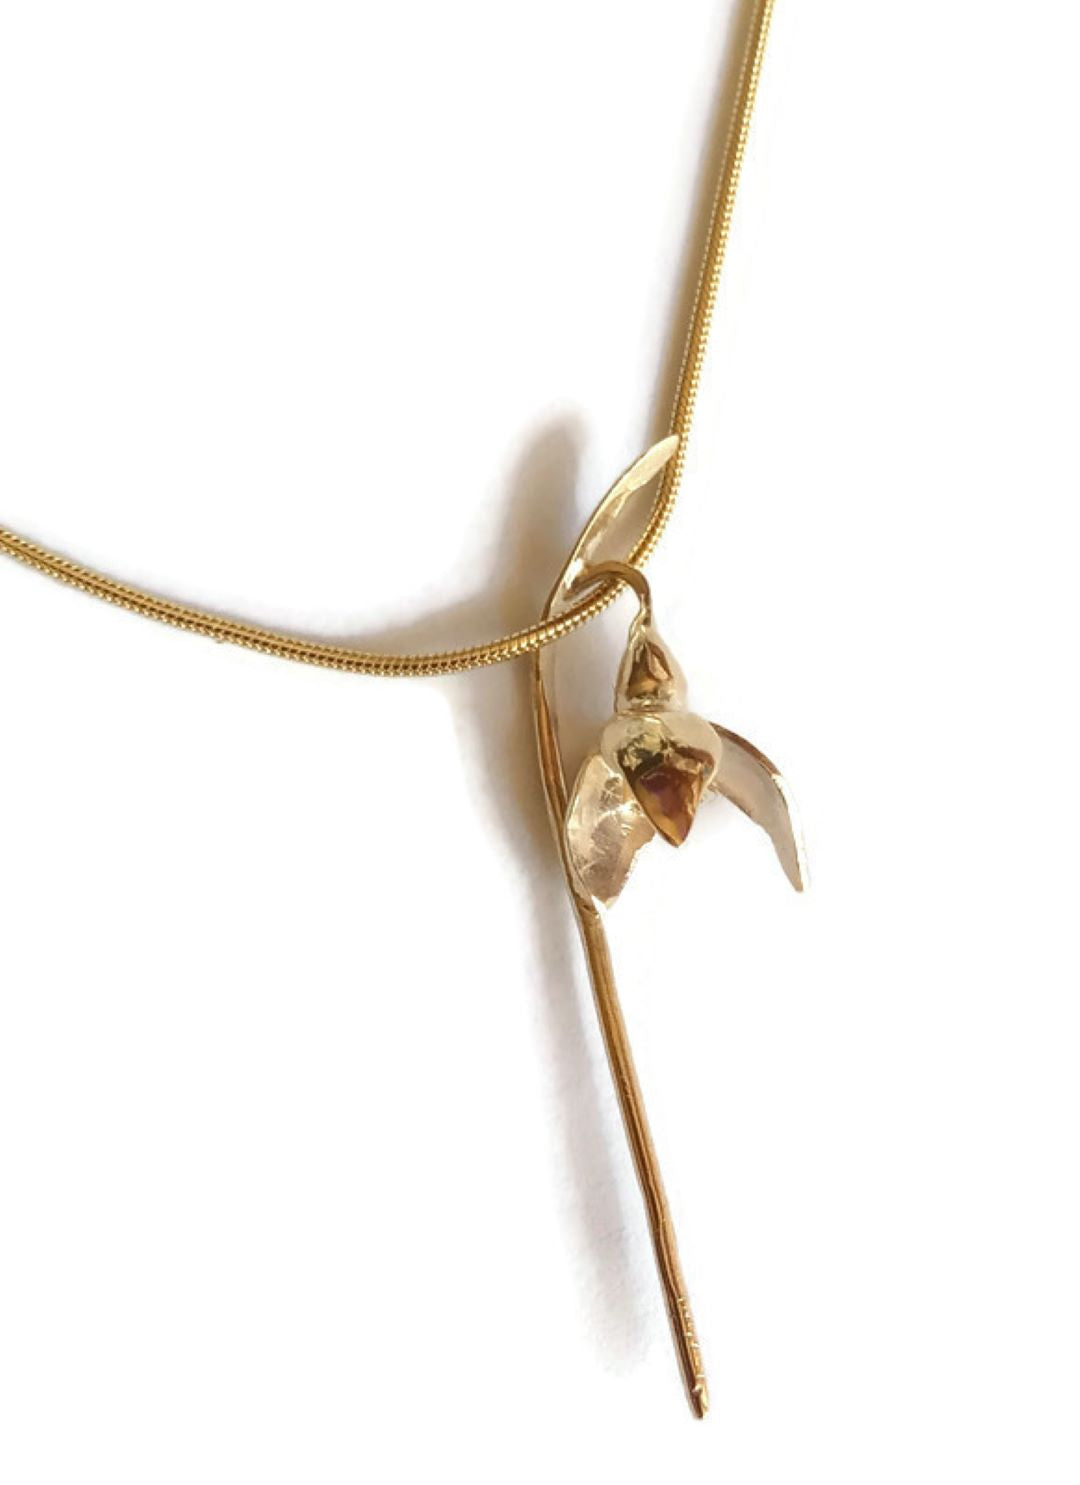 botanical single gold snowdrop pendant on gold snake chain, with white background